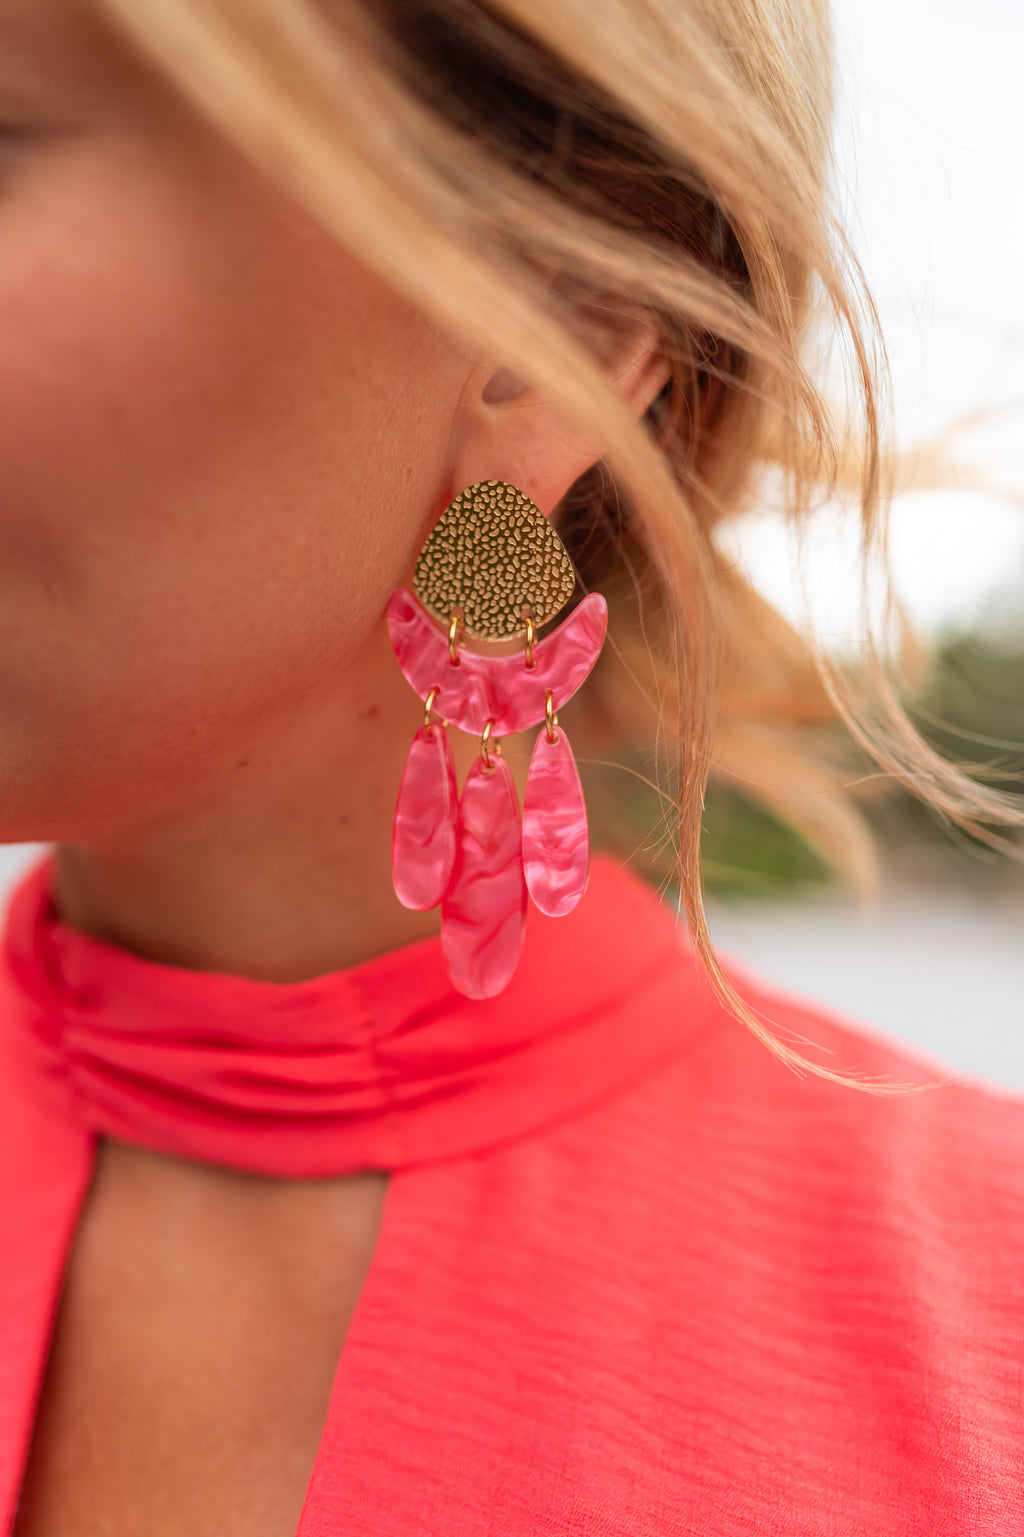 Dwayne earrings - pink and golden